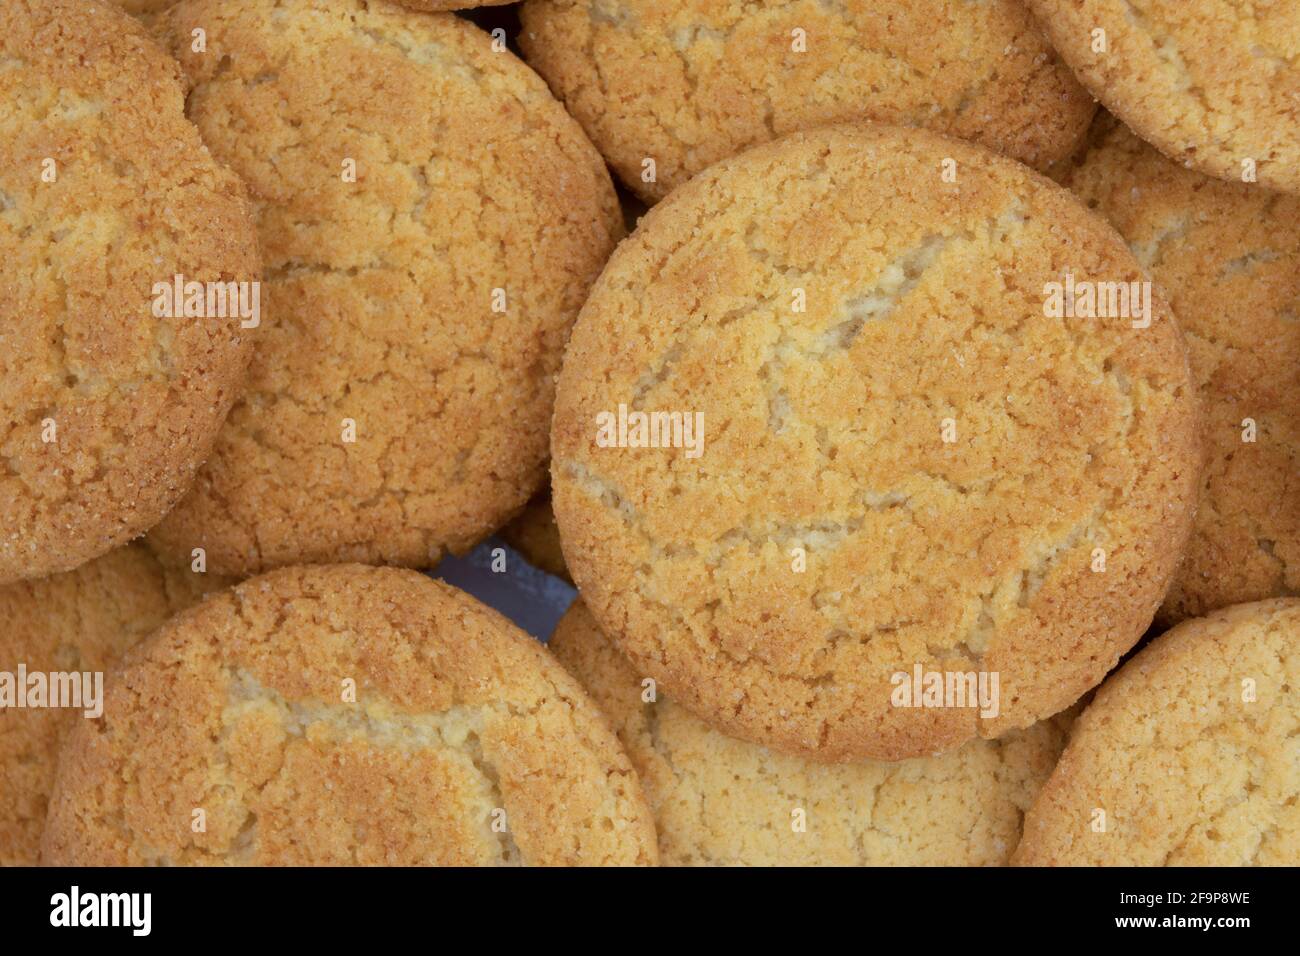 Close view of a group of coconut flavor cookies on a plate. Stock Photo